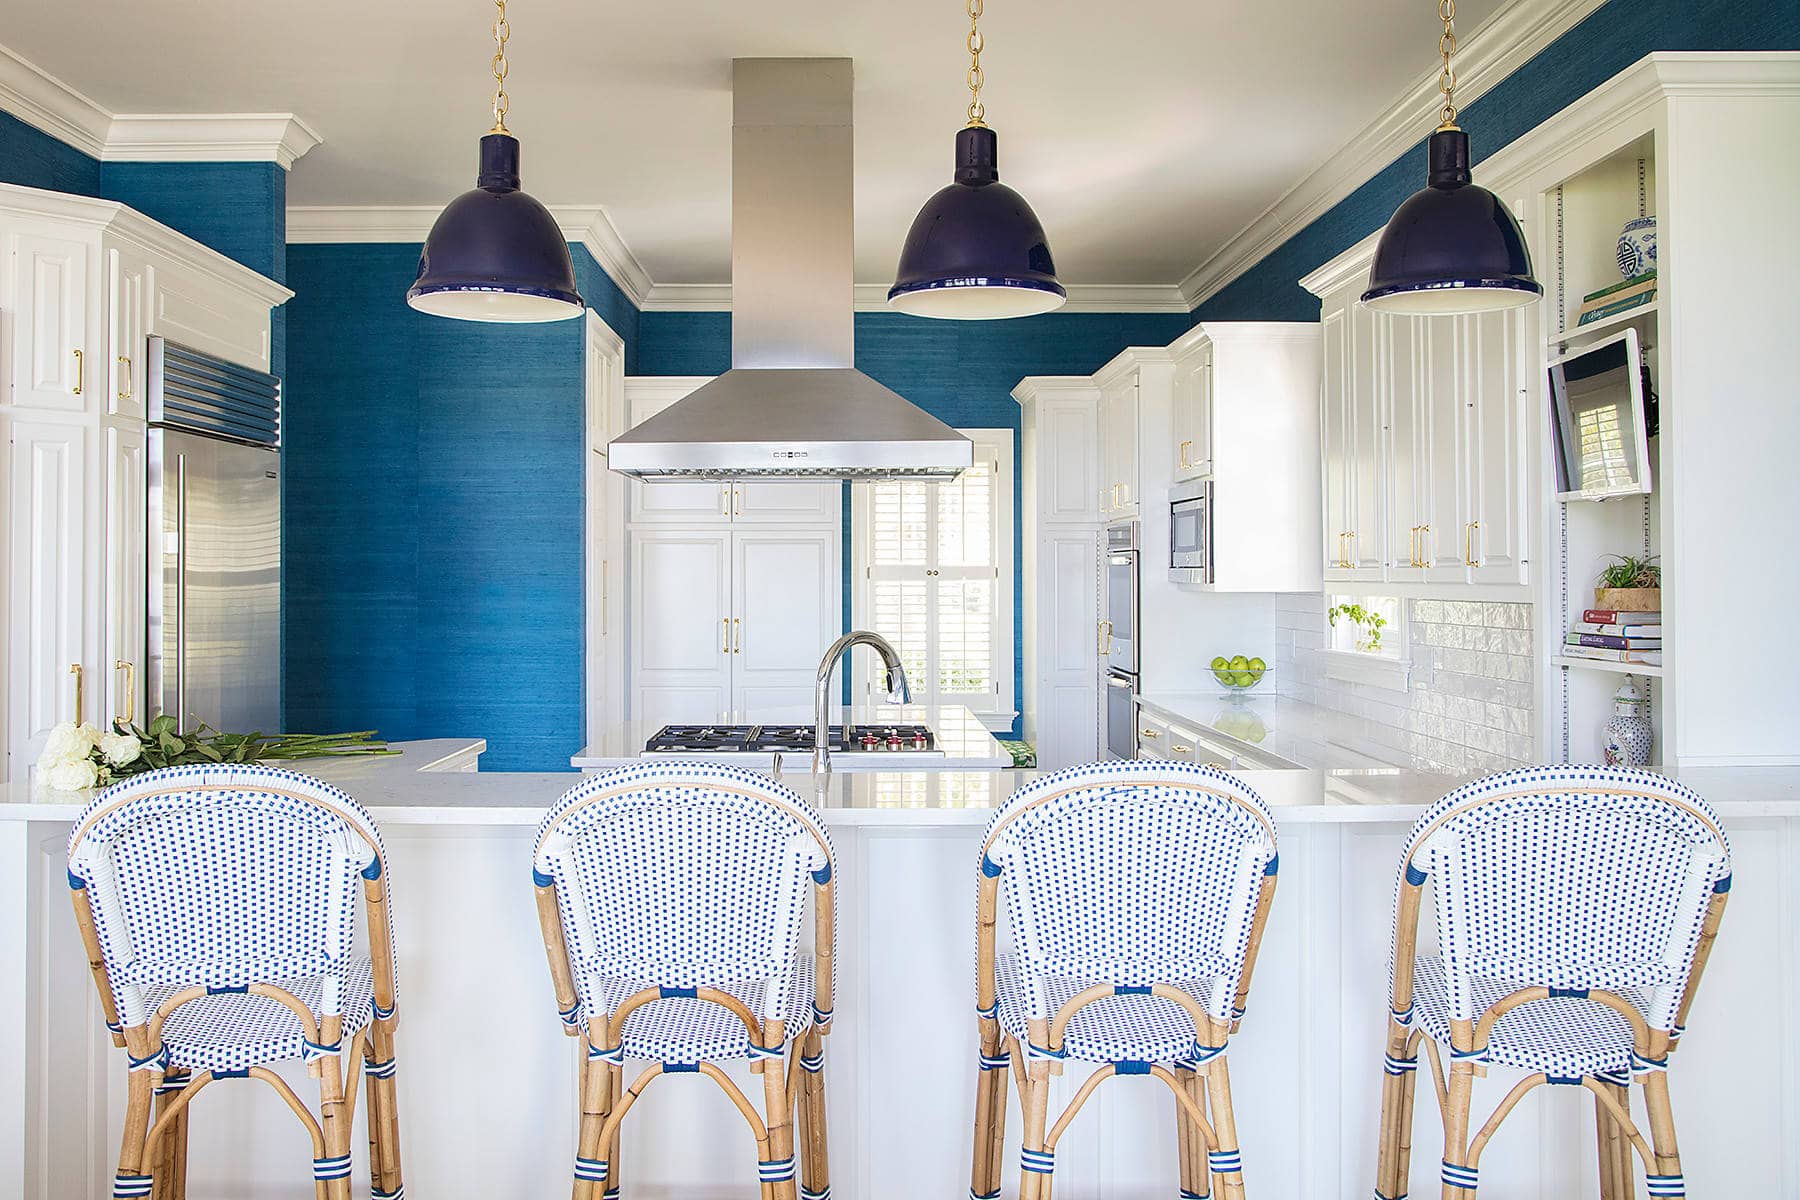 Home Tour: Kitchen featuring blue walls and white cabinets along with white and blue rattan chairs